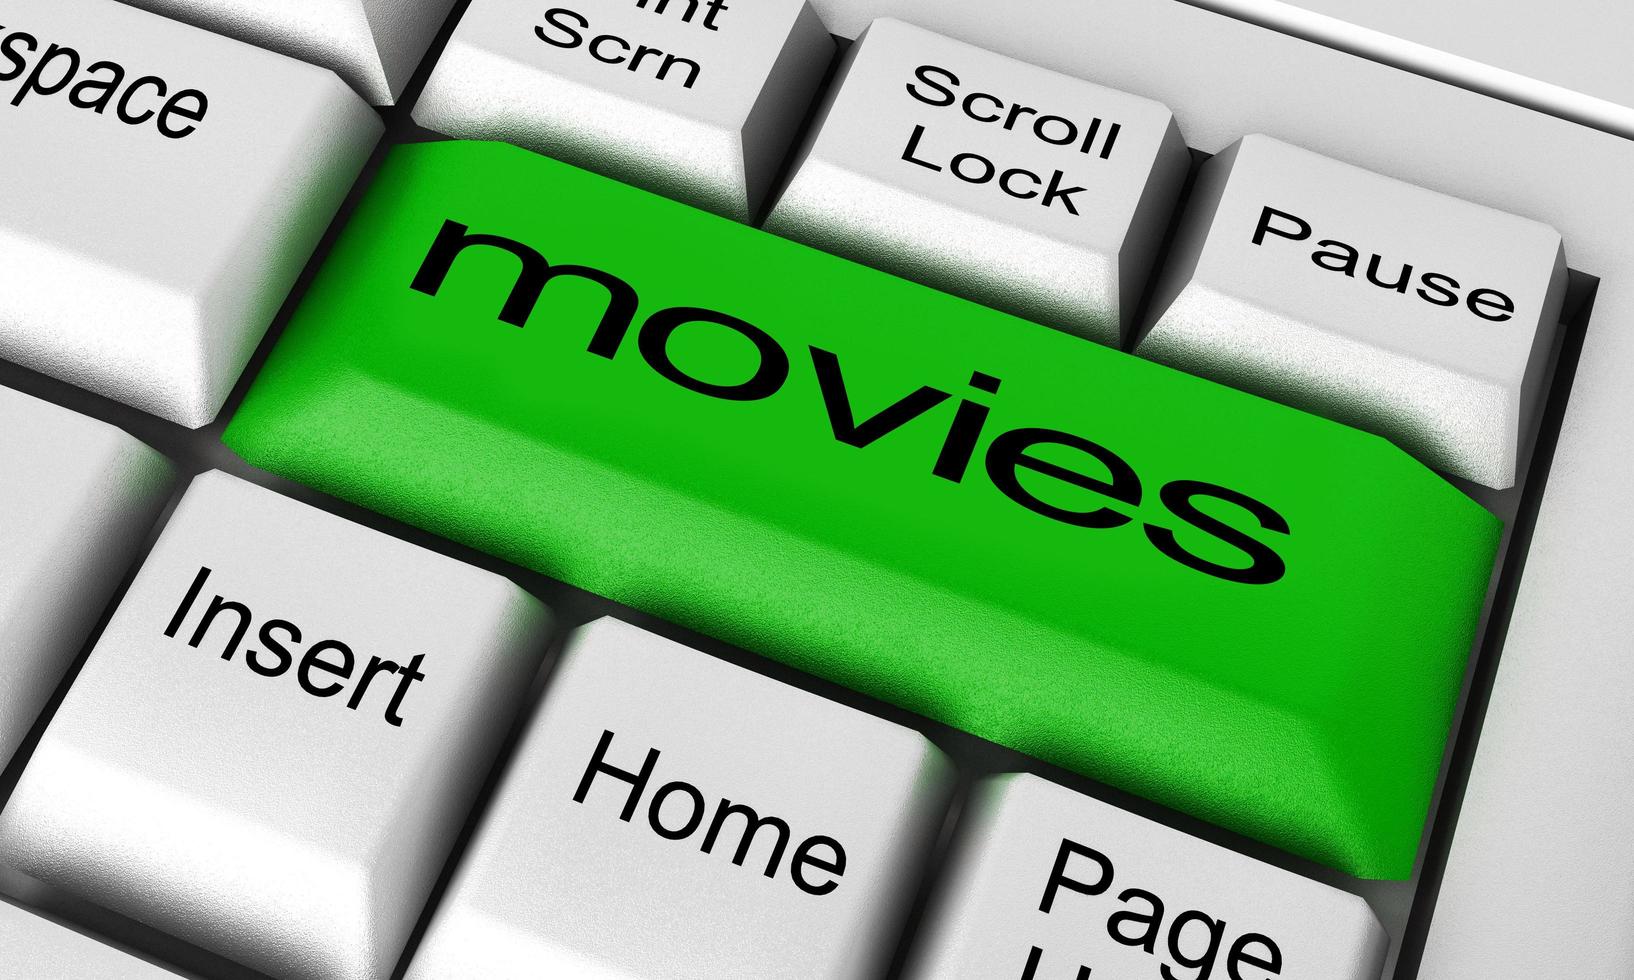 movies word on keyboard button photo